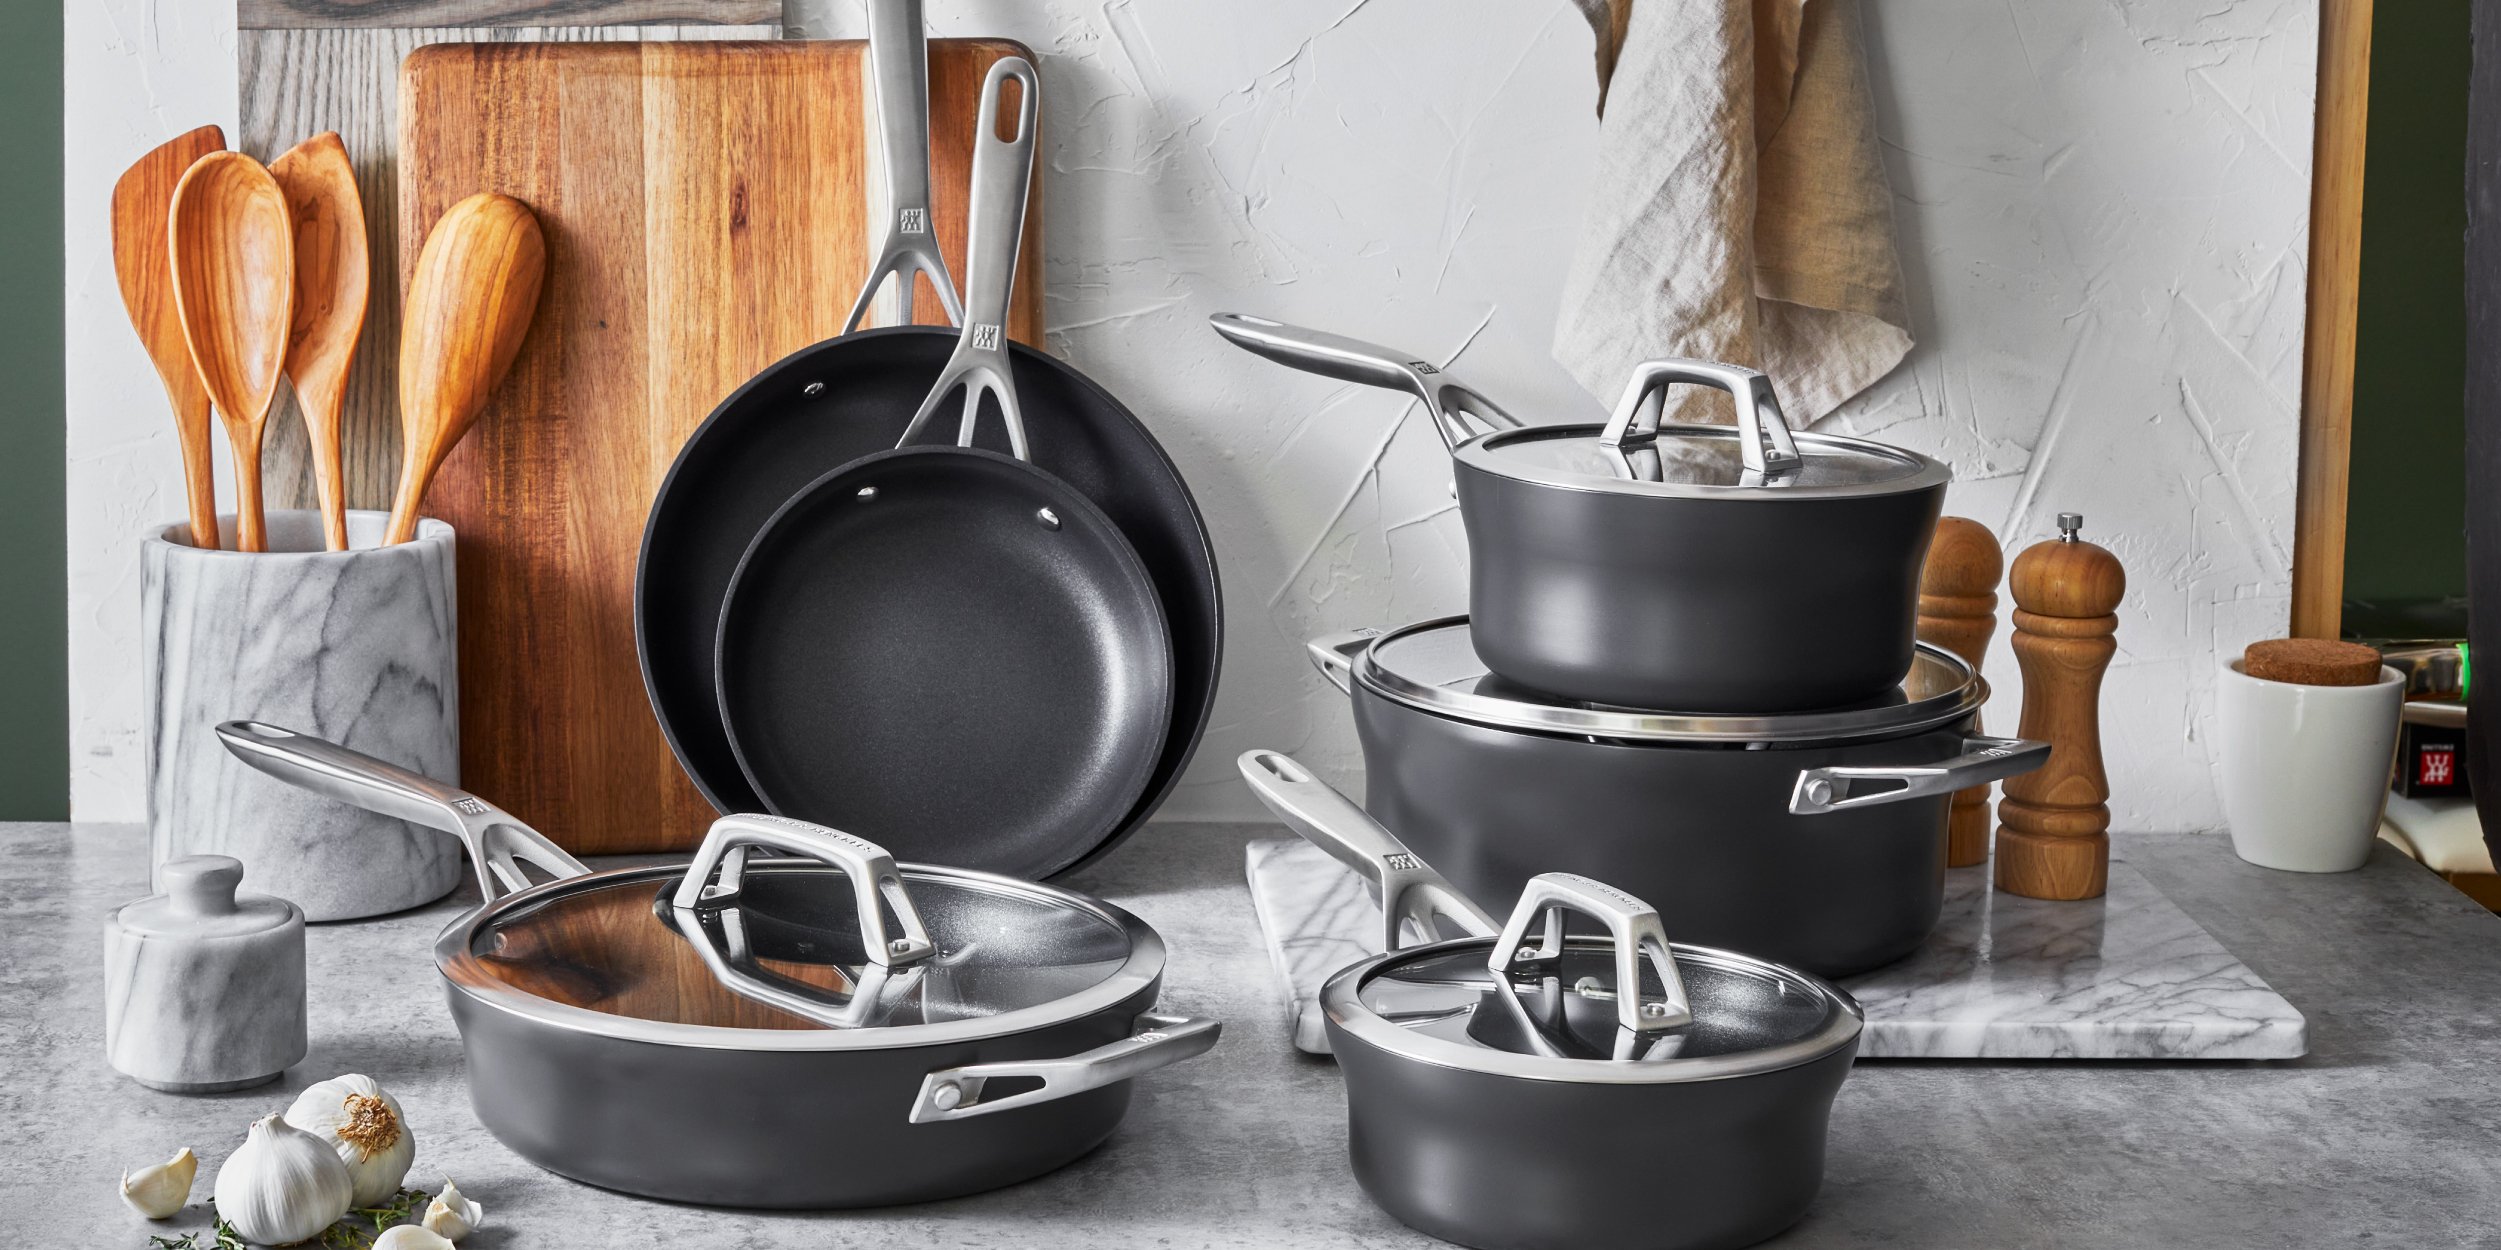 https://www.zwilling.com/on/demandware.static/-/Sites-zwilling-us-Library/default/dw24bd5a0f/images/product-content/masonry-content/zwilling/cookware/motion/ZW_Motion_Masonry_1200-600_ZW_MotionMasonry.jpg